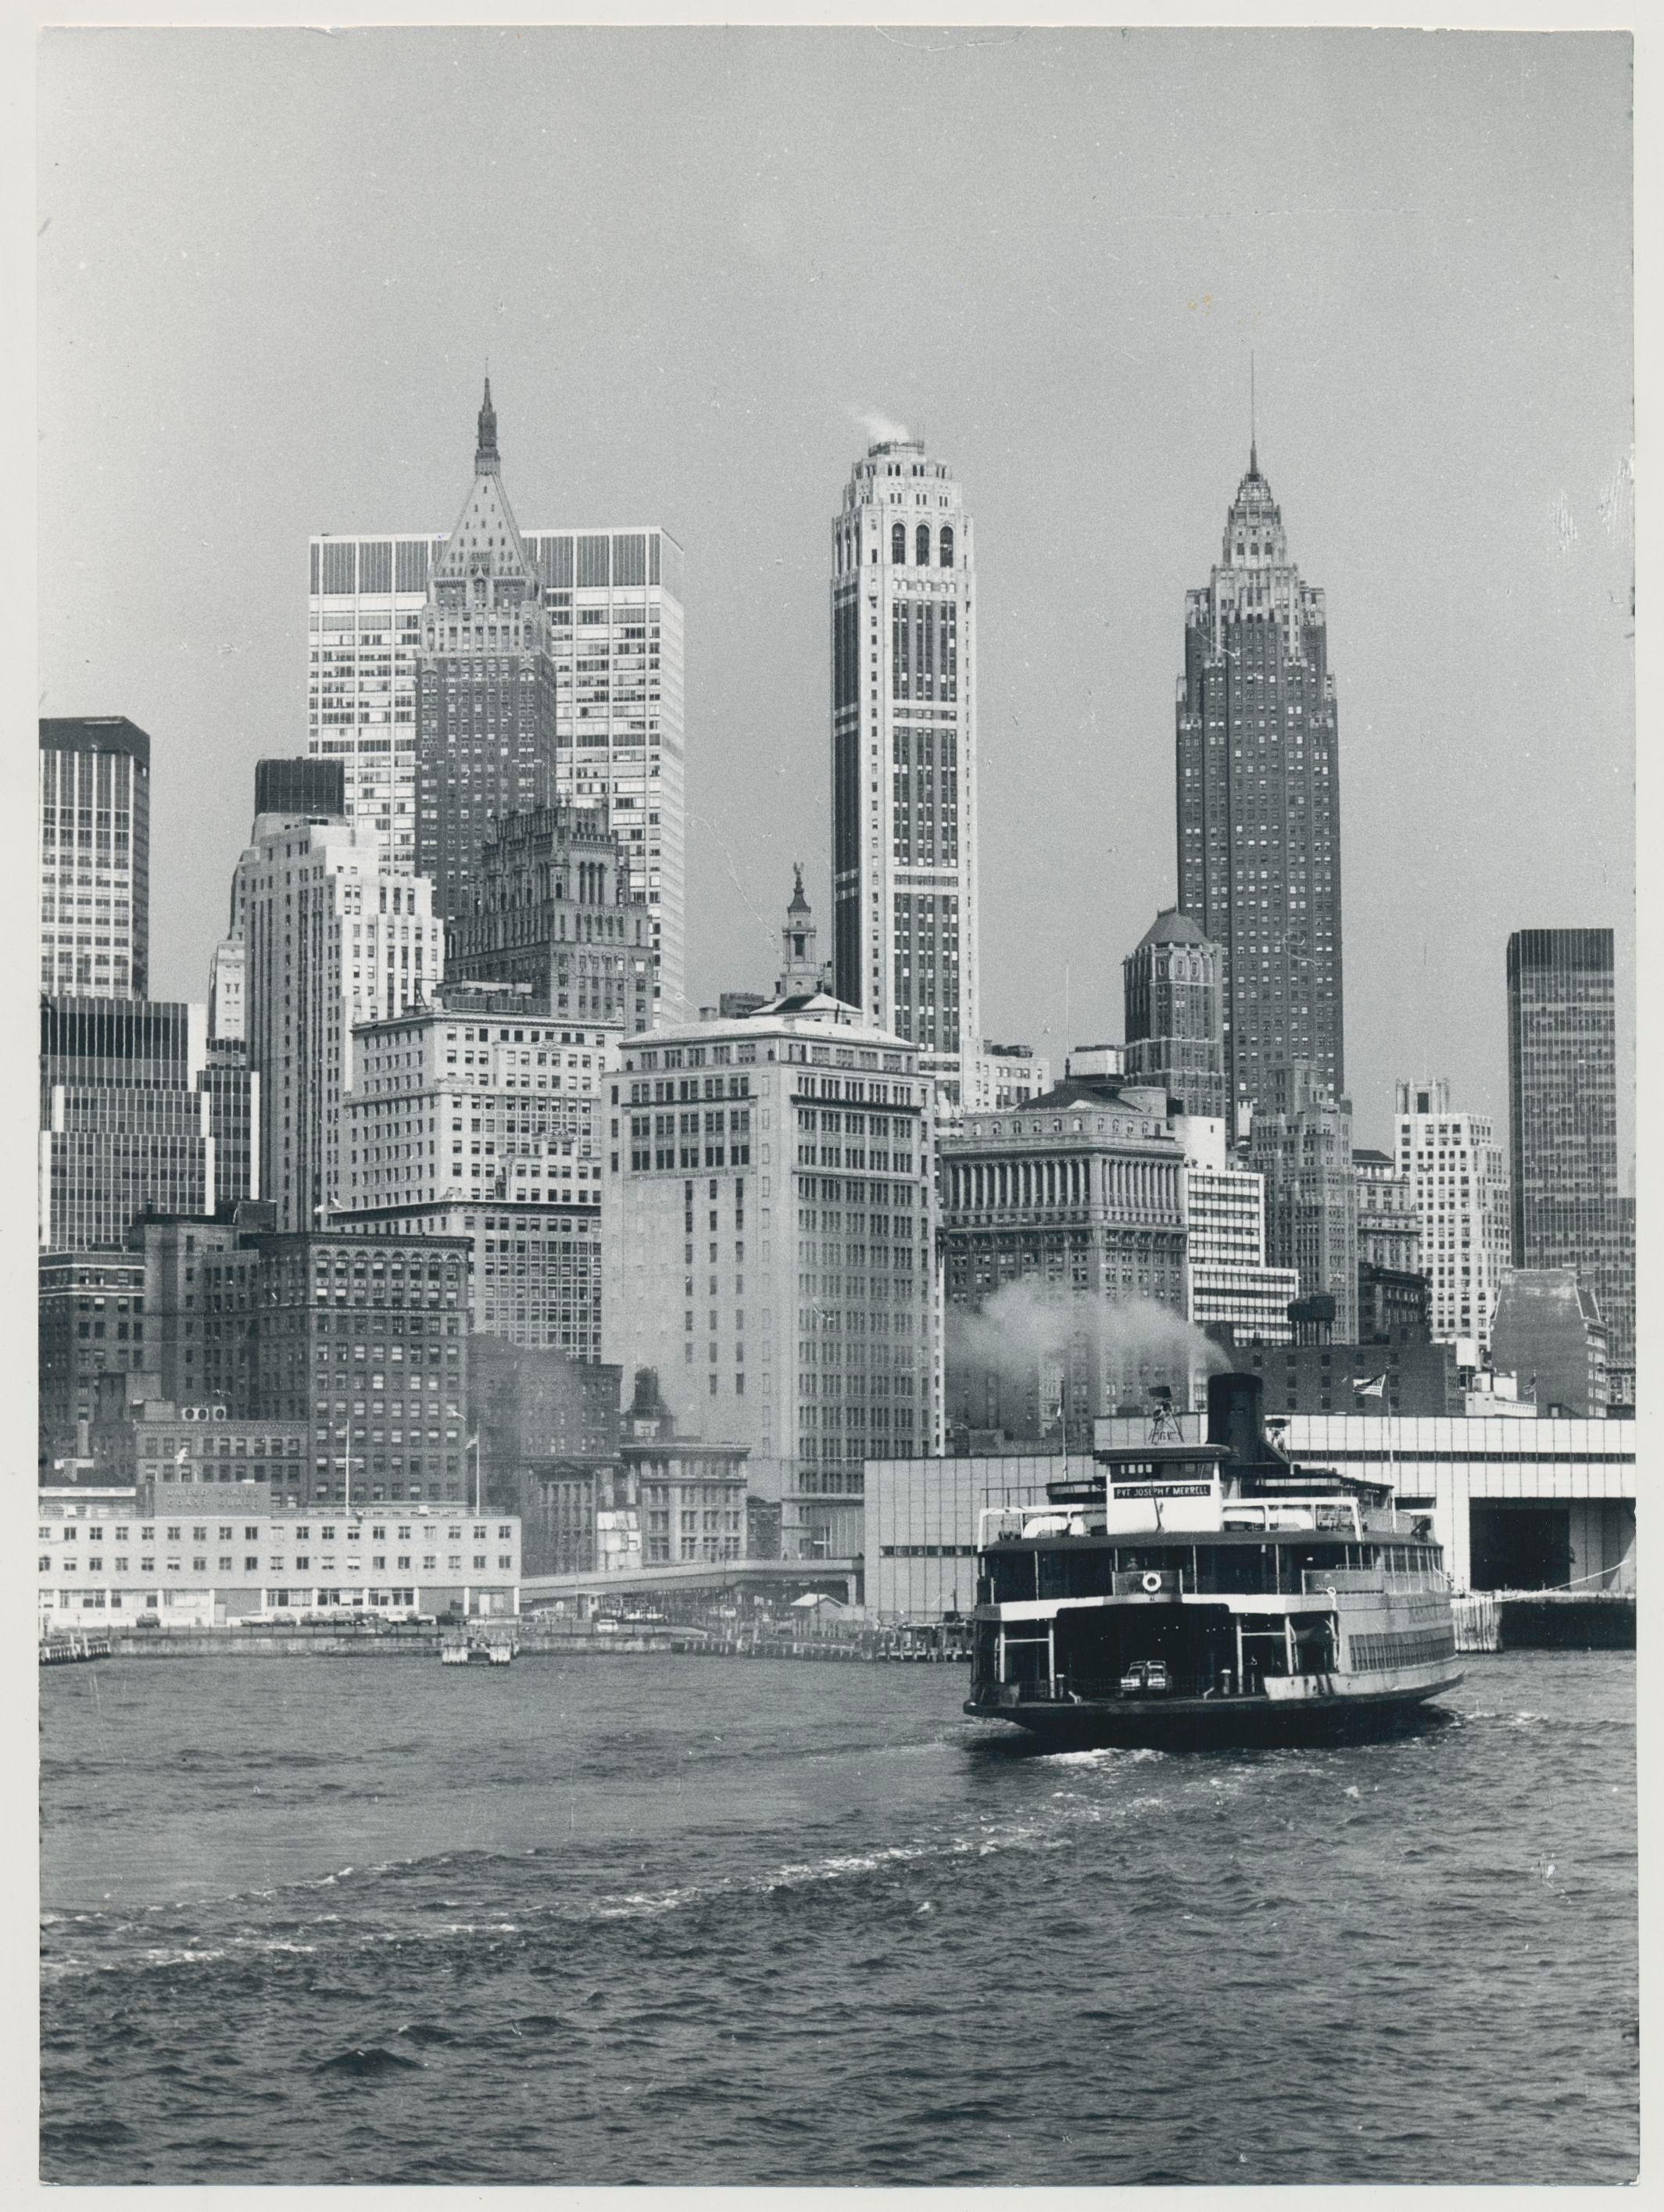 Erich Andres Black and White Photograph - New York City, Waterfront, Black and White, USA 1960s, 23, 4 x 17, 3 cm